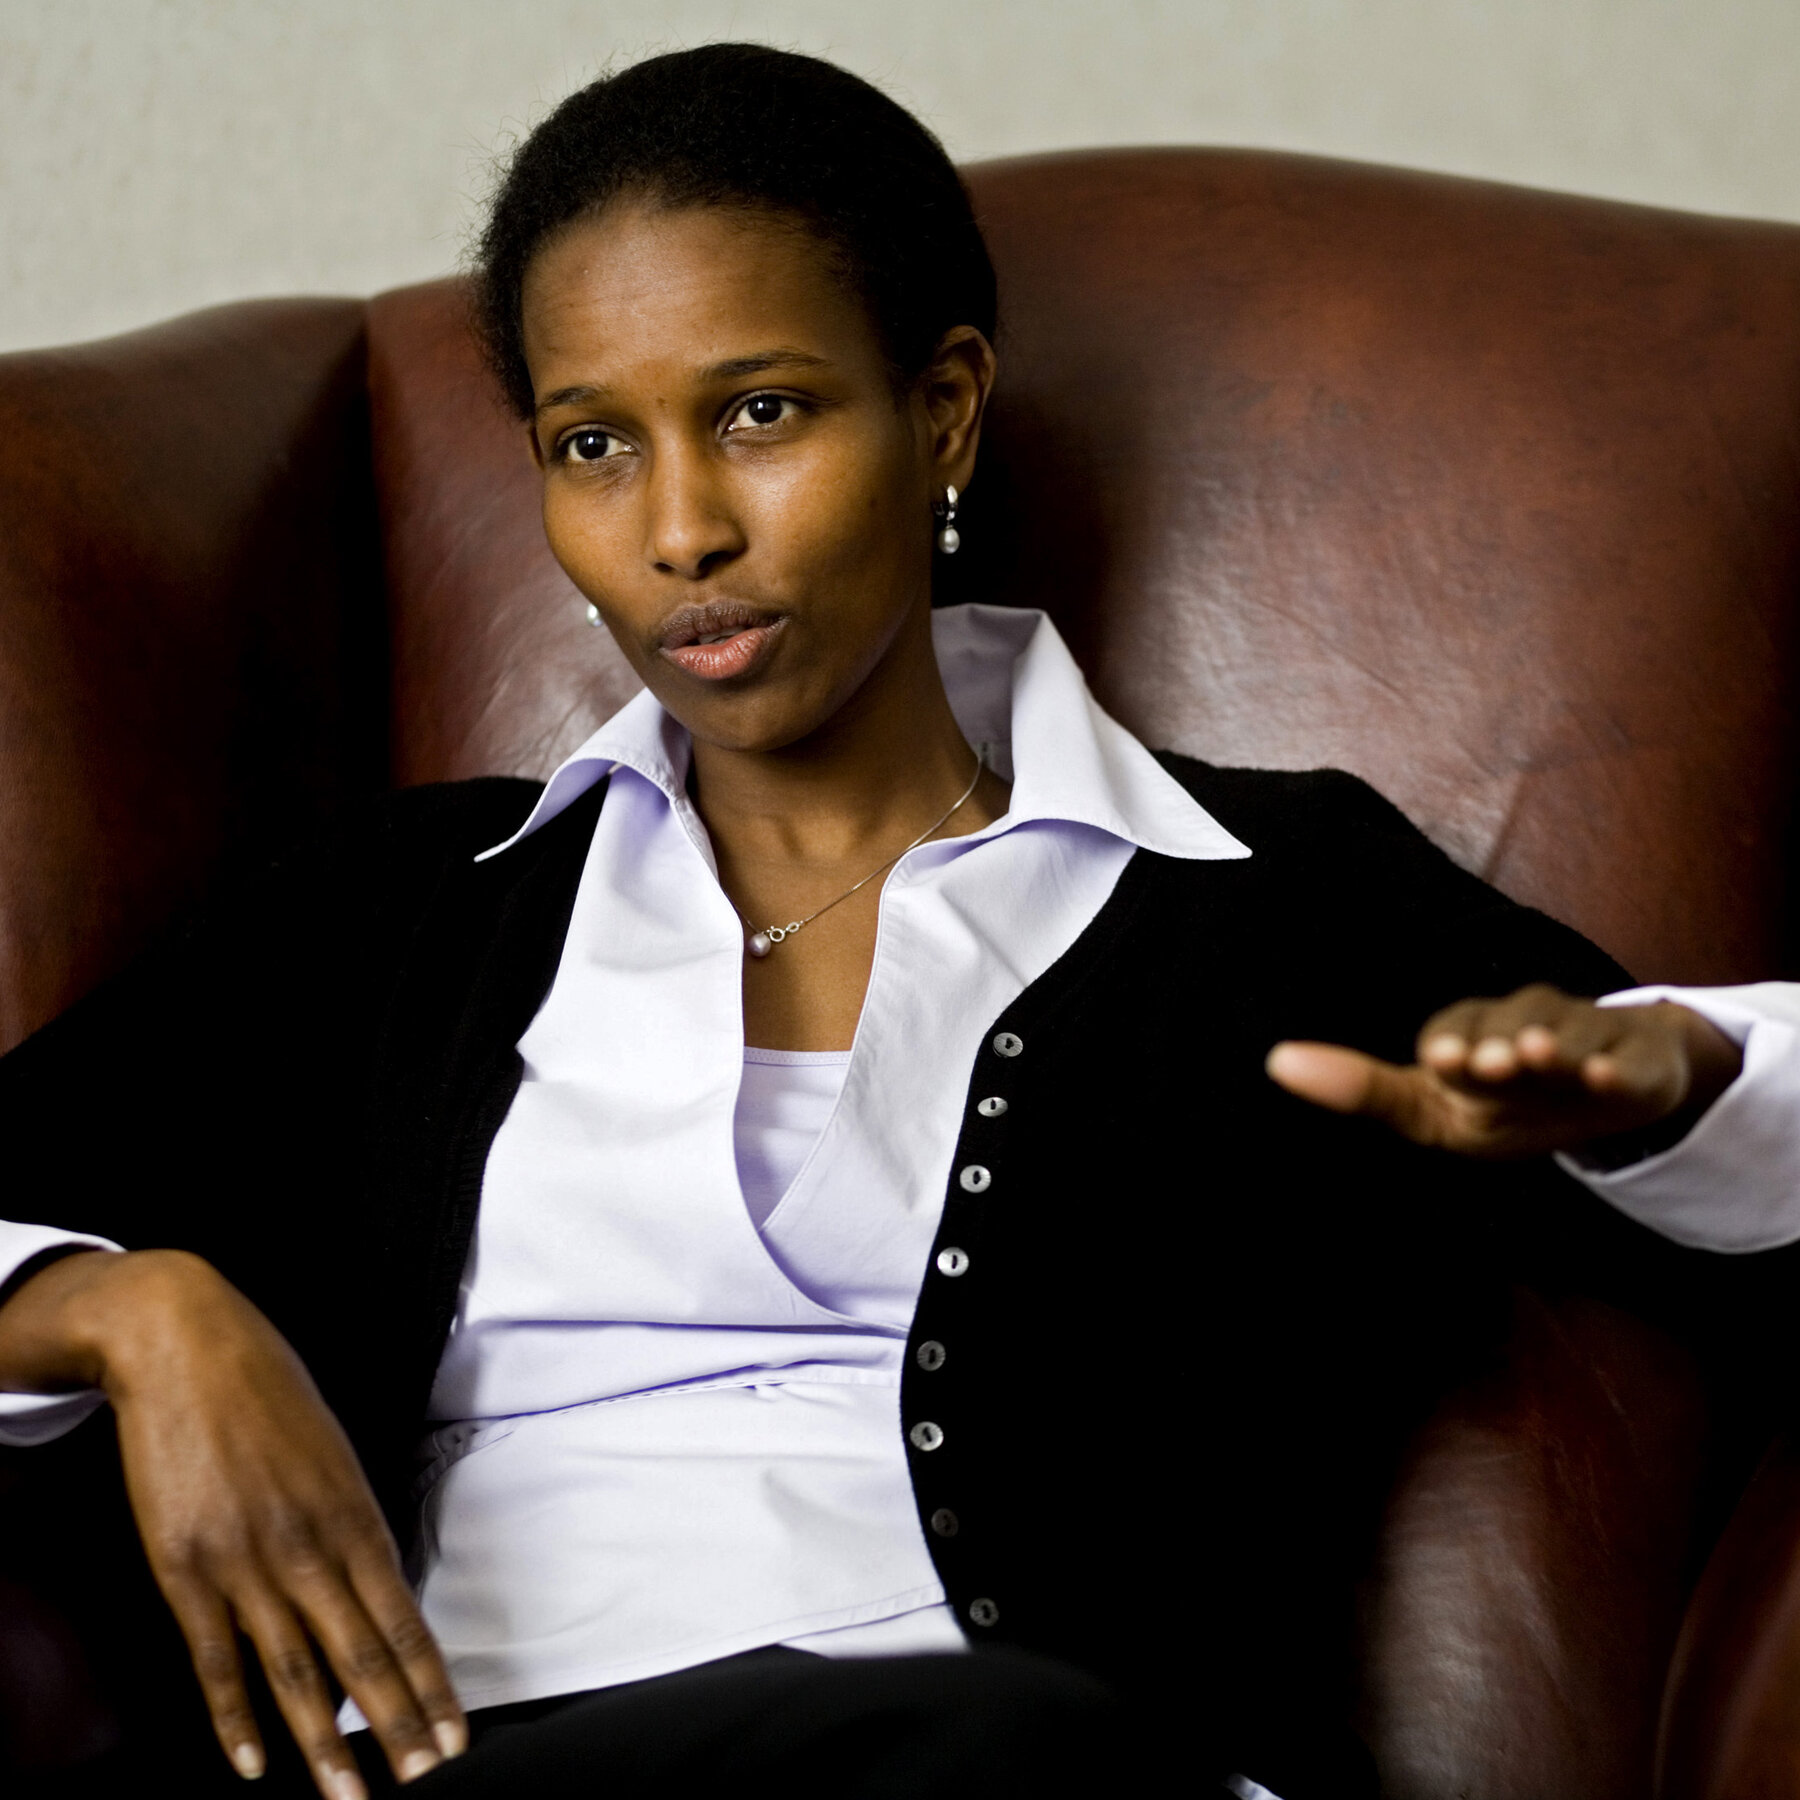 Ayaan Hirsi Ali on Islam and the defense of Western Civilization